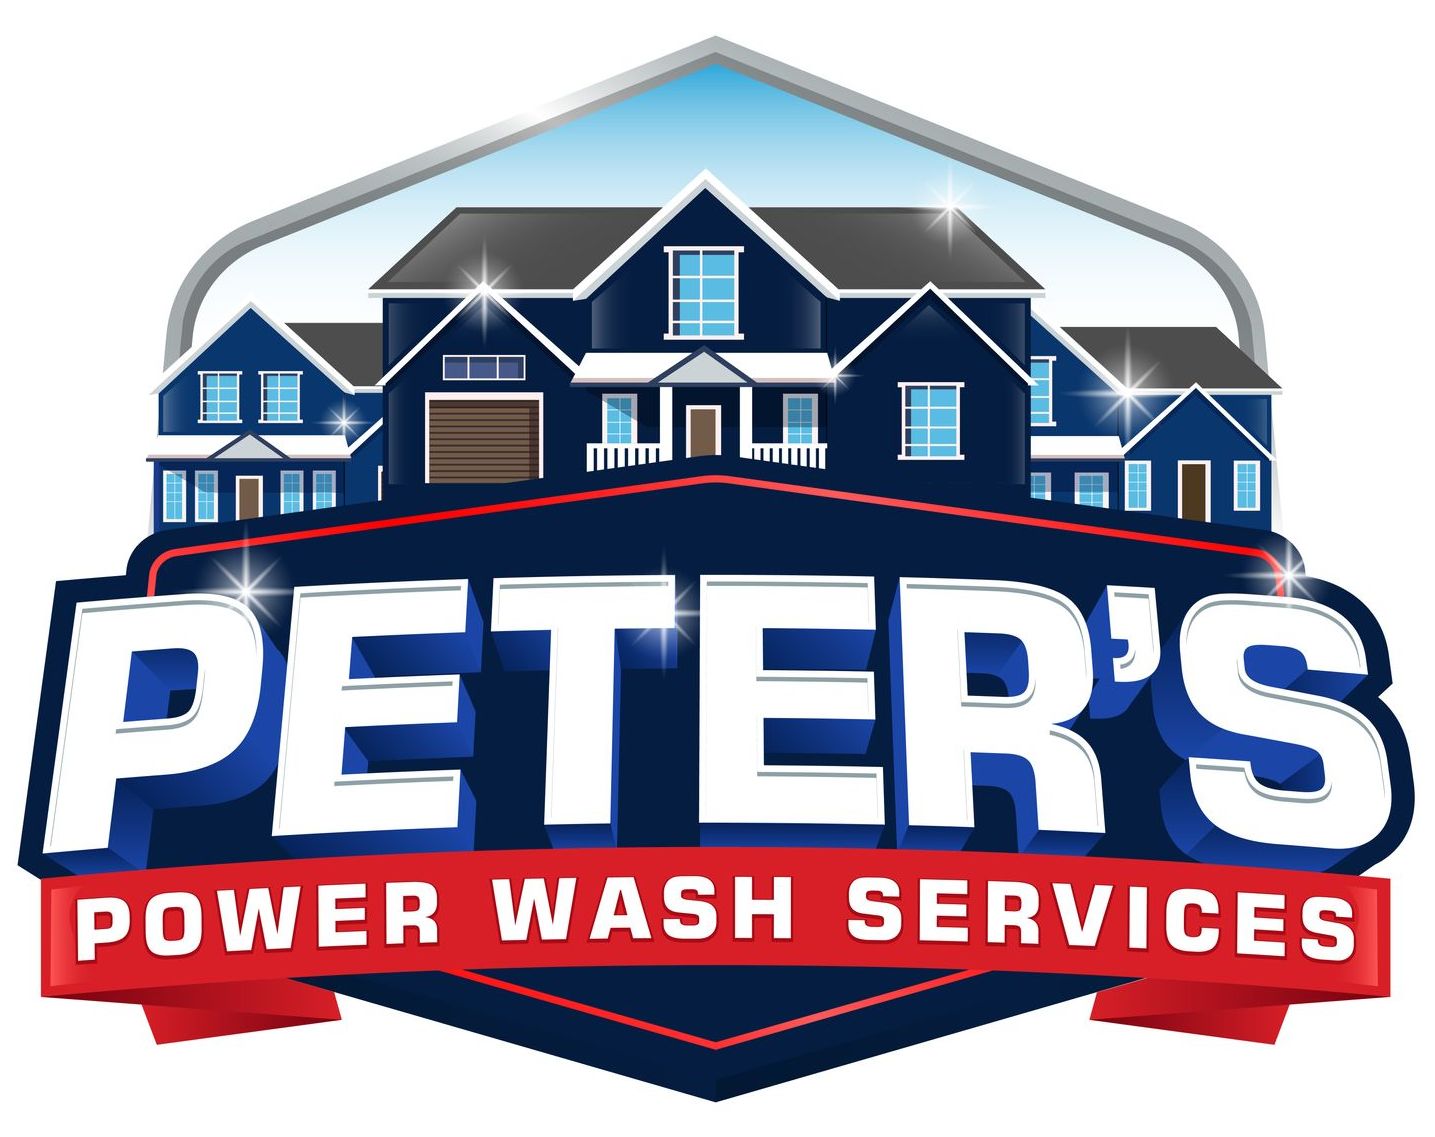 Peter’s Power Wash Services